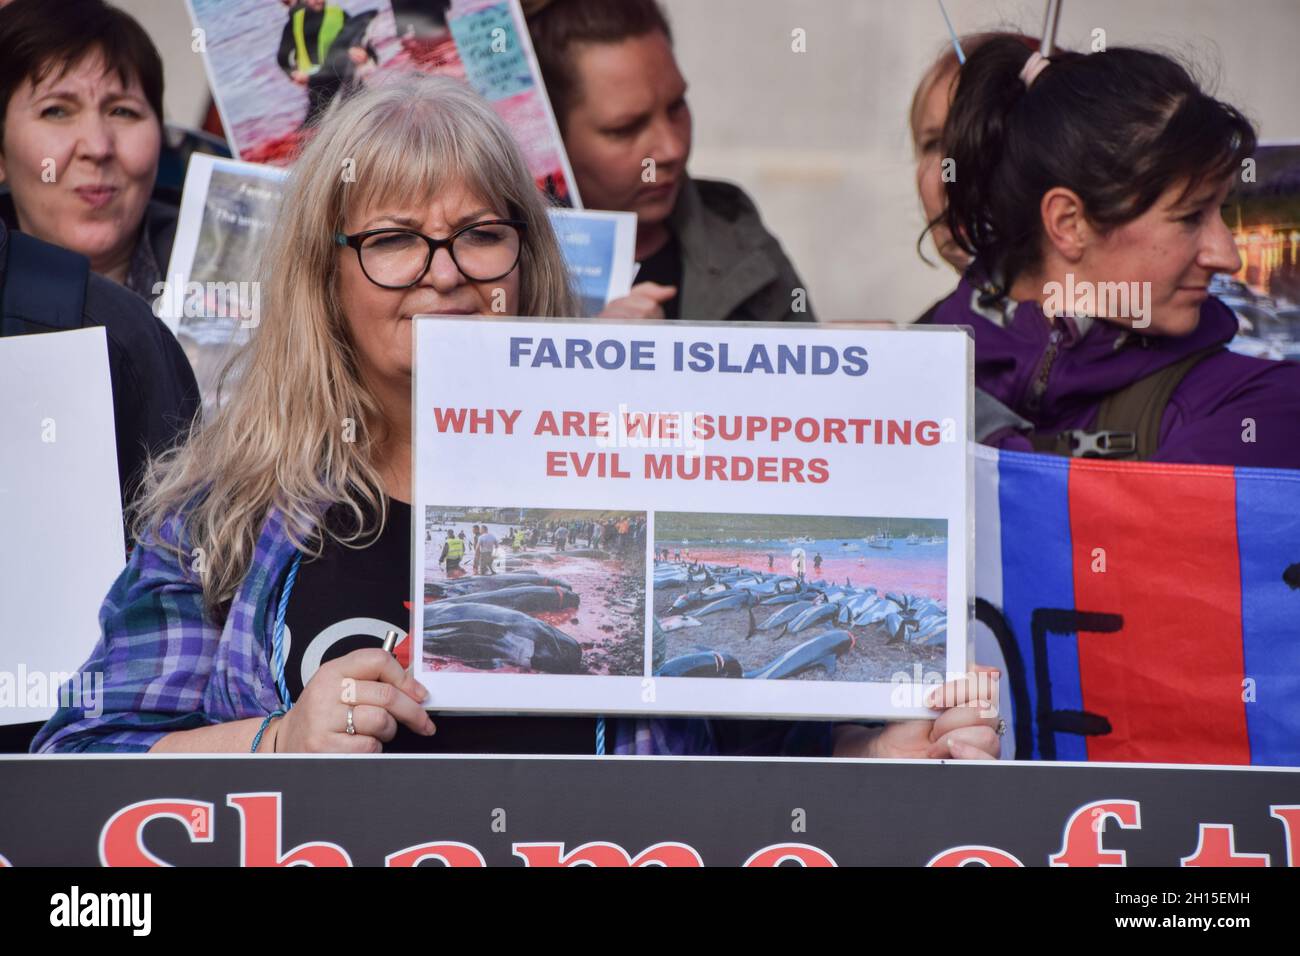 London, UK. 16th Oct, 2021. A protester holds a placard critical of the Faroe Islands during the demonstration in Trafalgar Square.Members of marine conservation organization Sea Shepherd and other activists marched through Westminster, calling for an end to the slaughter of dolphins in Faroe Islands and Taiji, Japan. Credit: SOPA Images Limited/Alamy Live News Stock Photo